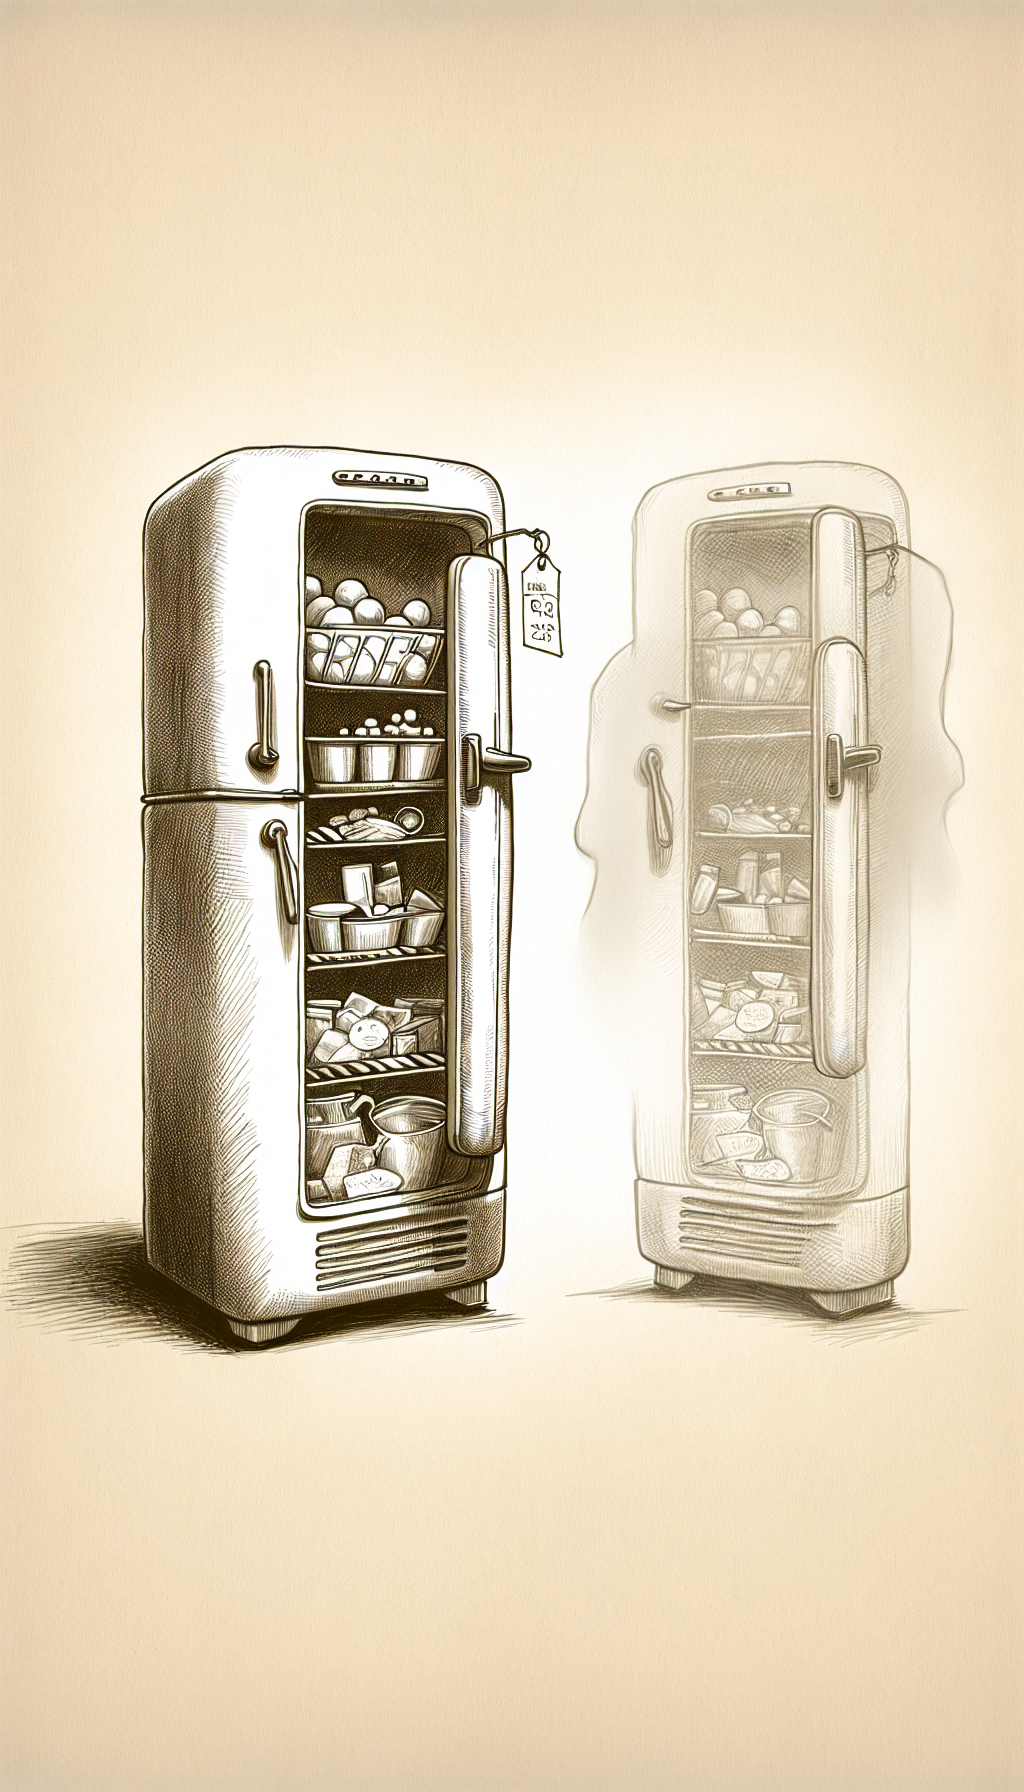 A whimsical, sepia-toned sketch features a classic 1950s refrigerator with its door ajar, revealing shelves filled with vintage coins and gemstones, substituting typical food items. Above the fridge, a translucent, ghostly silhouette of an icebox hints at its historical predecessor, with a price tag dangling from its handle, capturing the essence of the antique refrigerator's value through time.